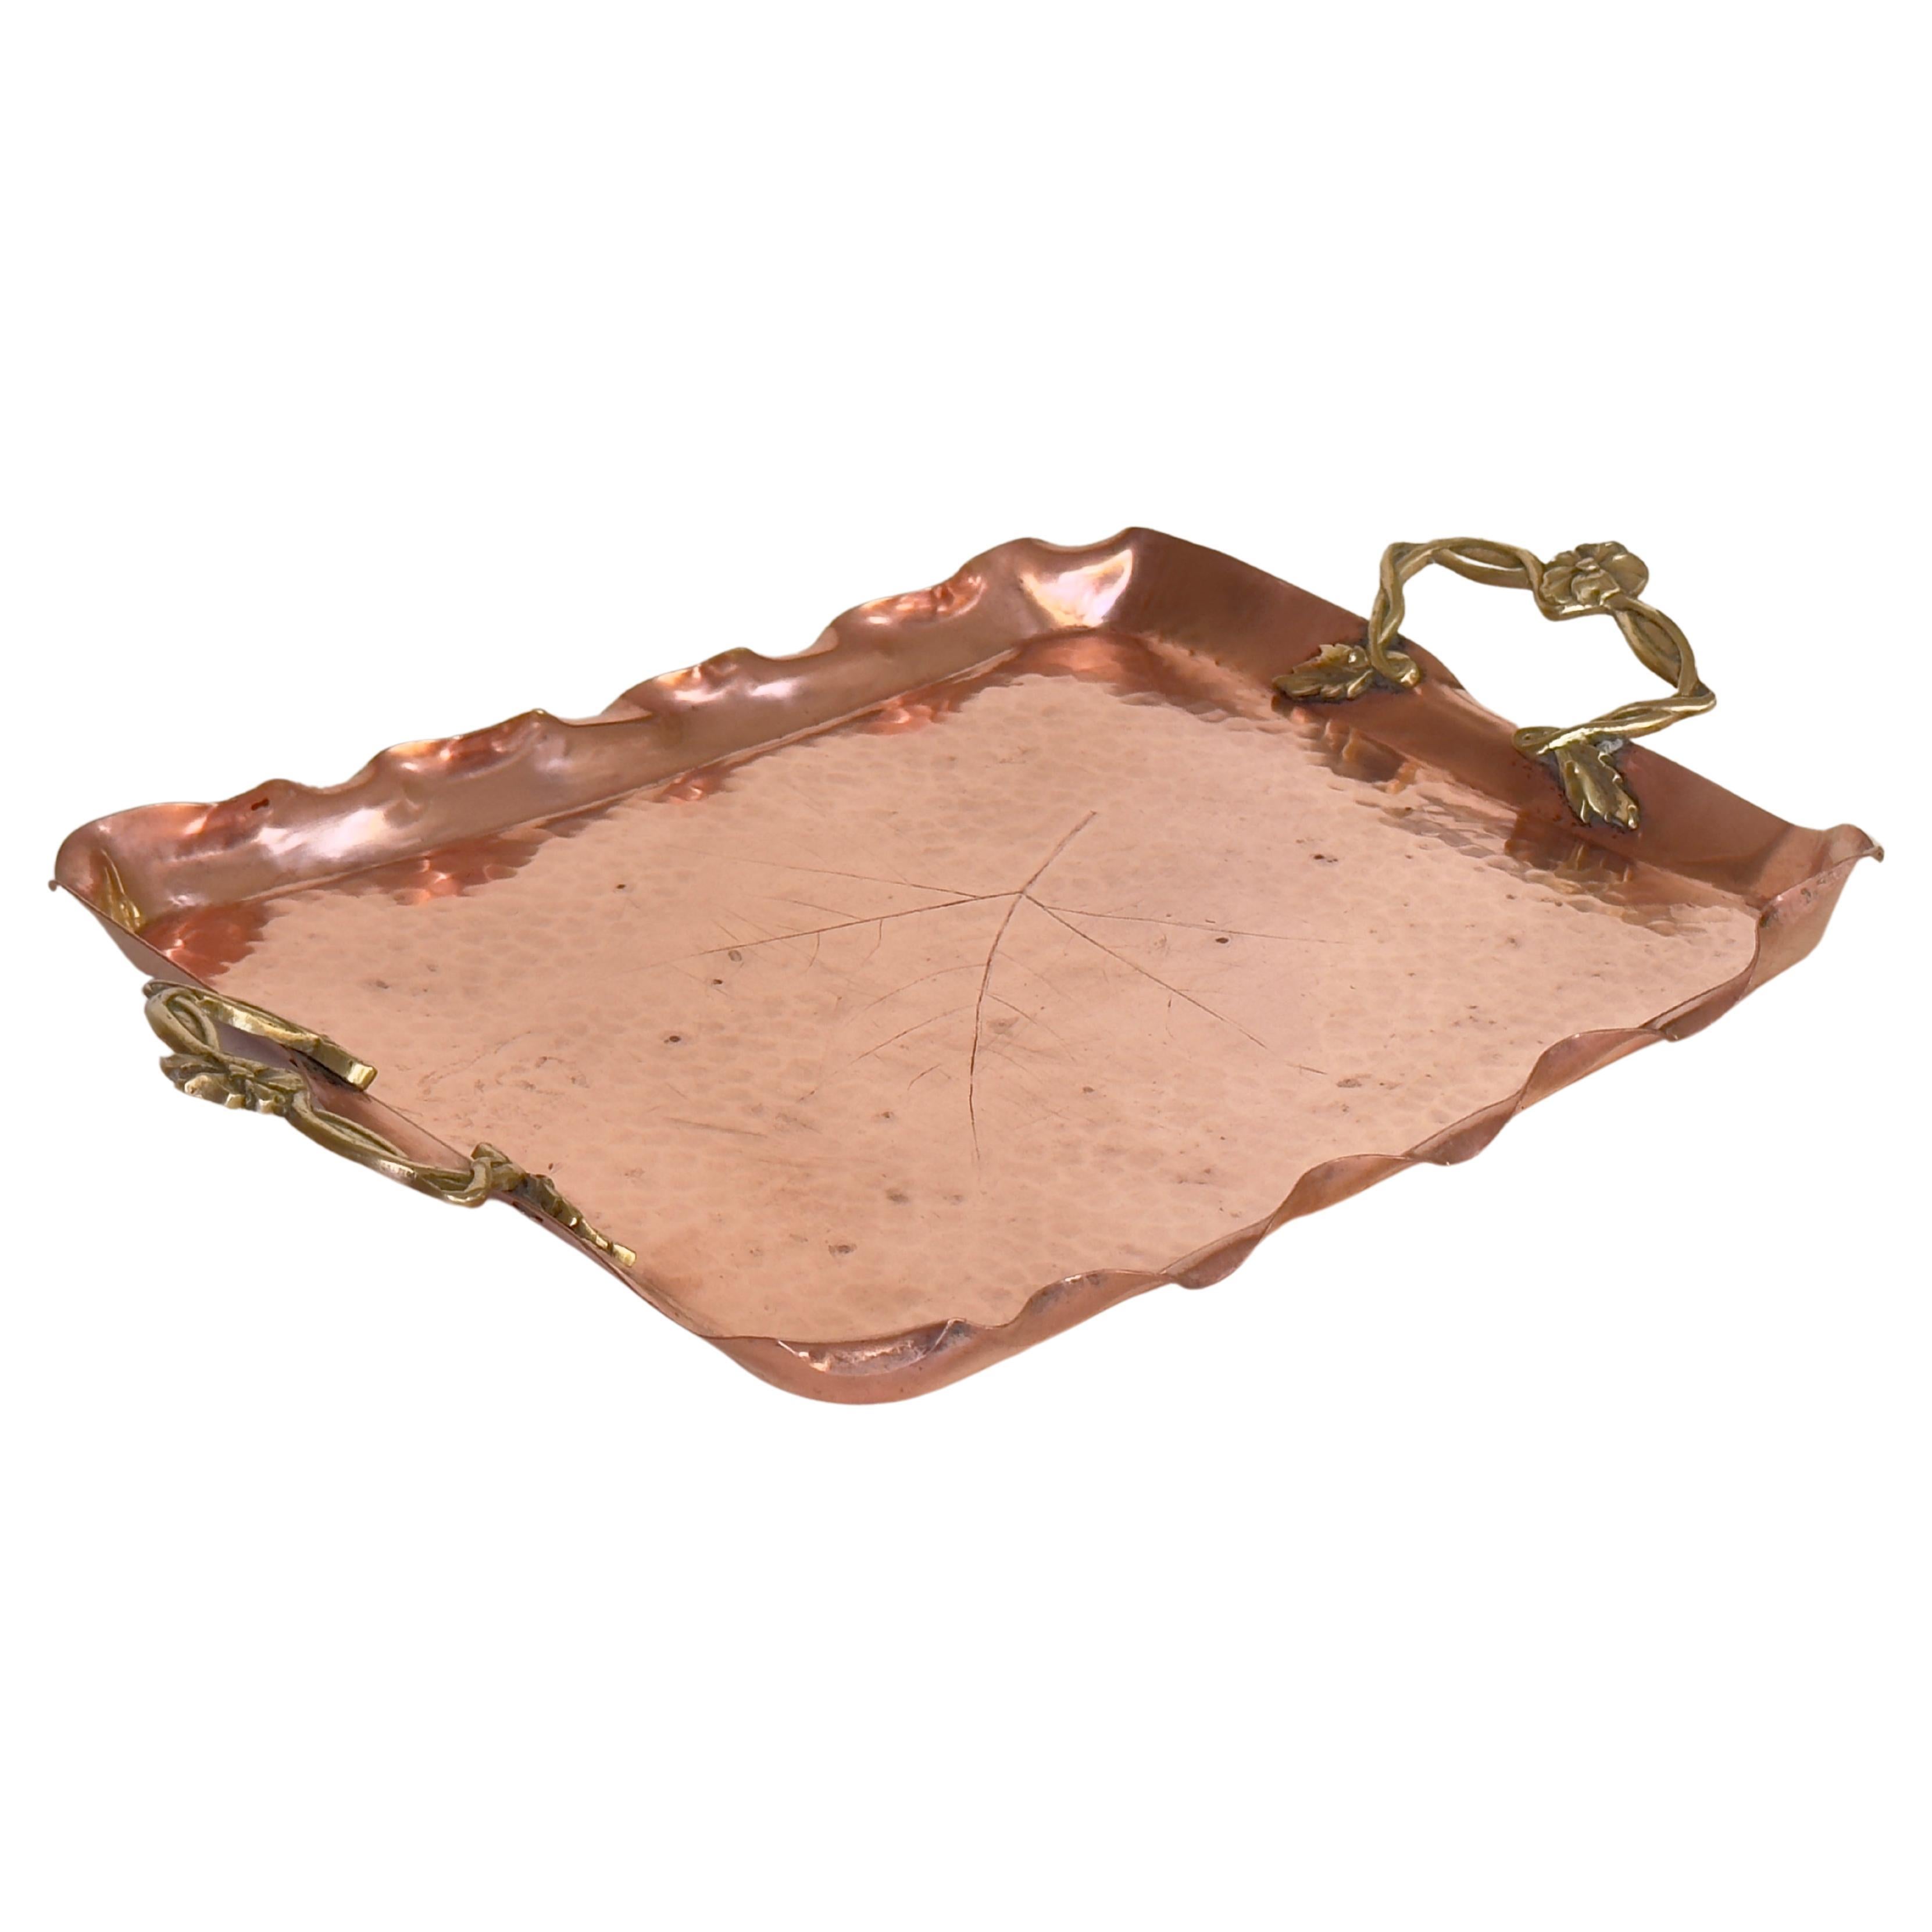 Platter in Copper and Brass 2 Handles Gold and cooper Color Deutch 18eme Century For Sale